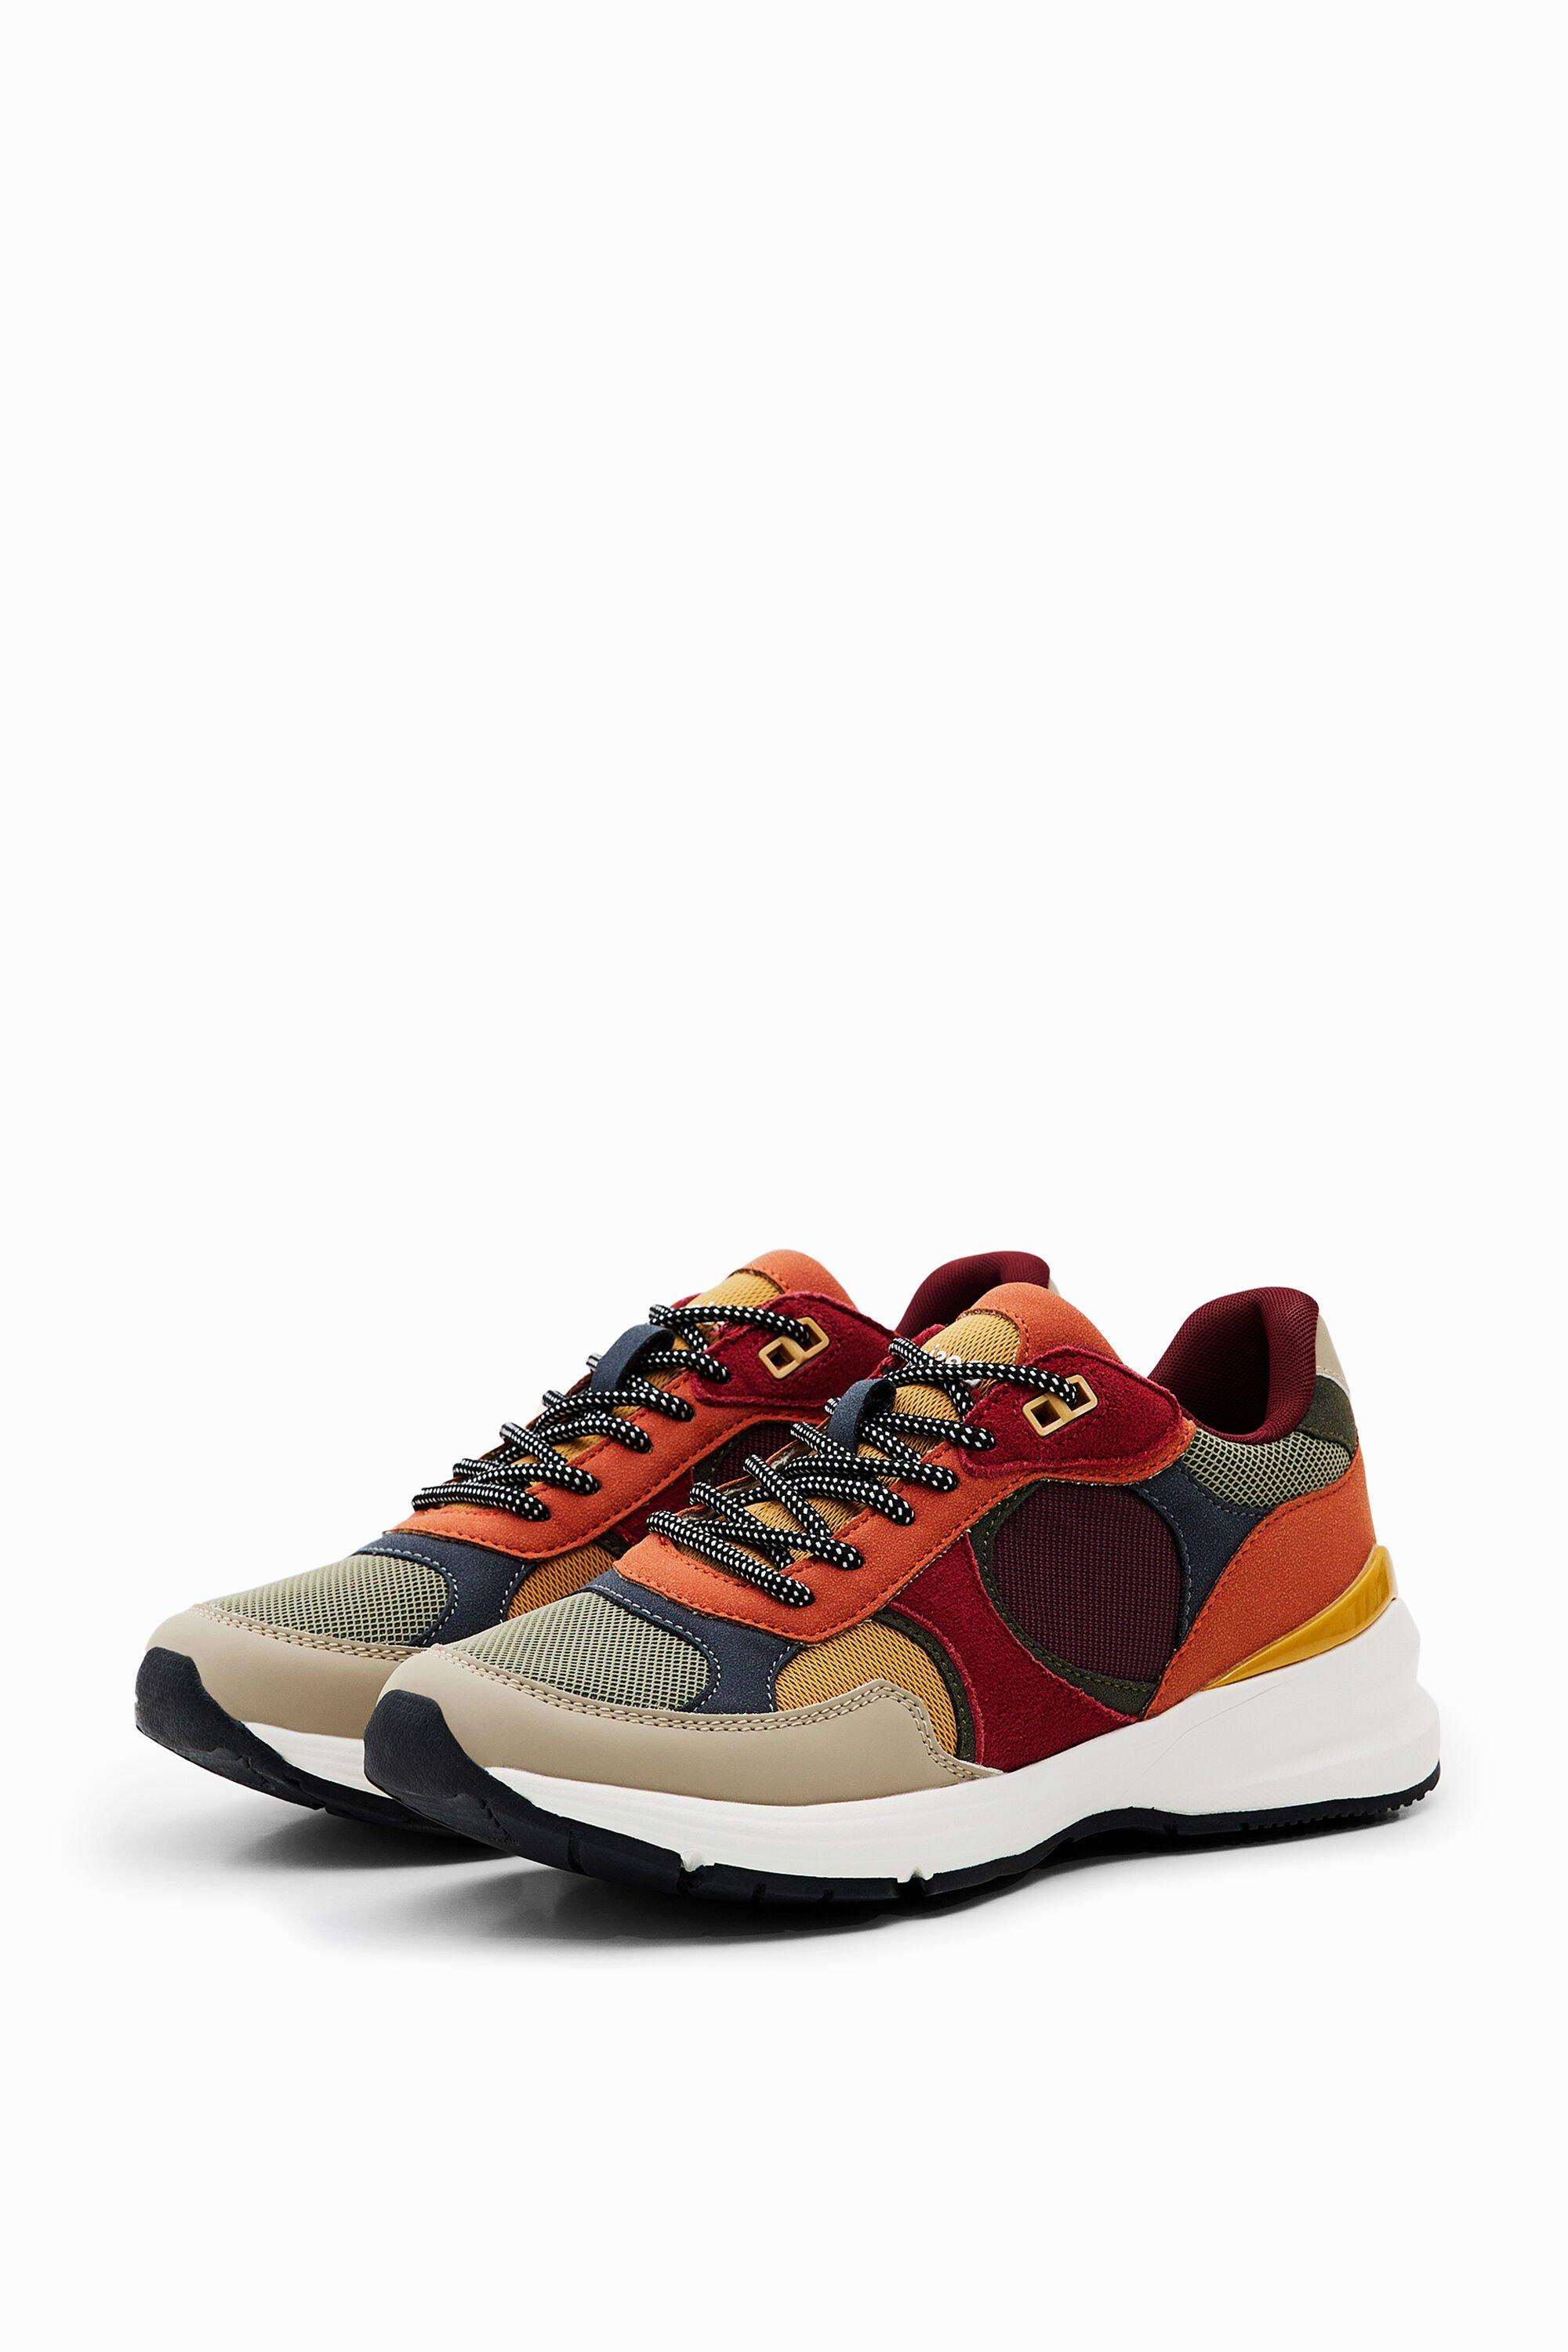 Desigual Patchwork Running Sneakers in Red | Lyst